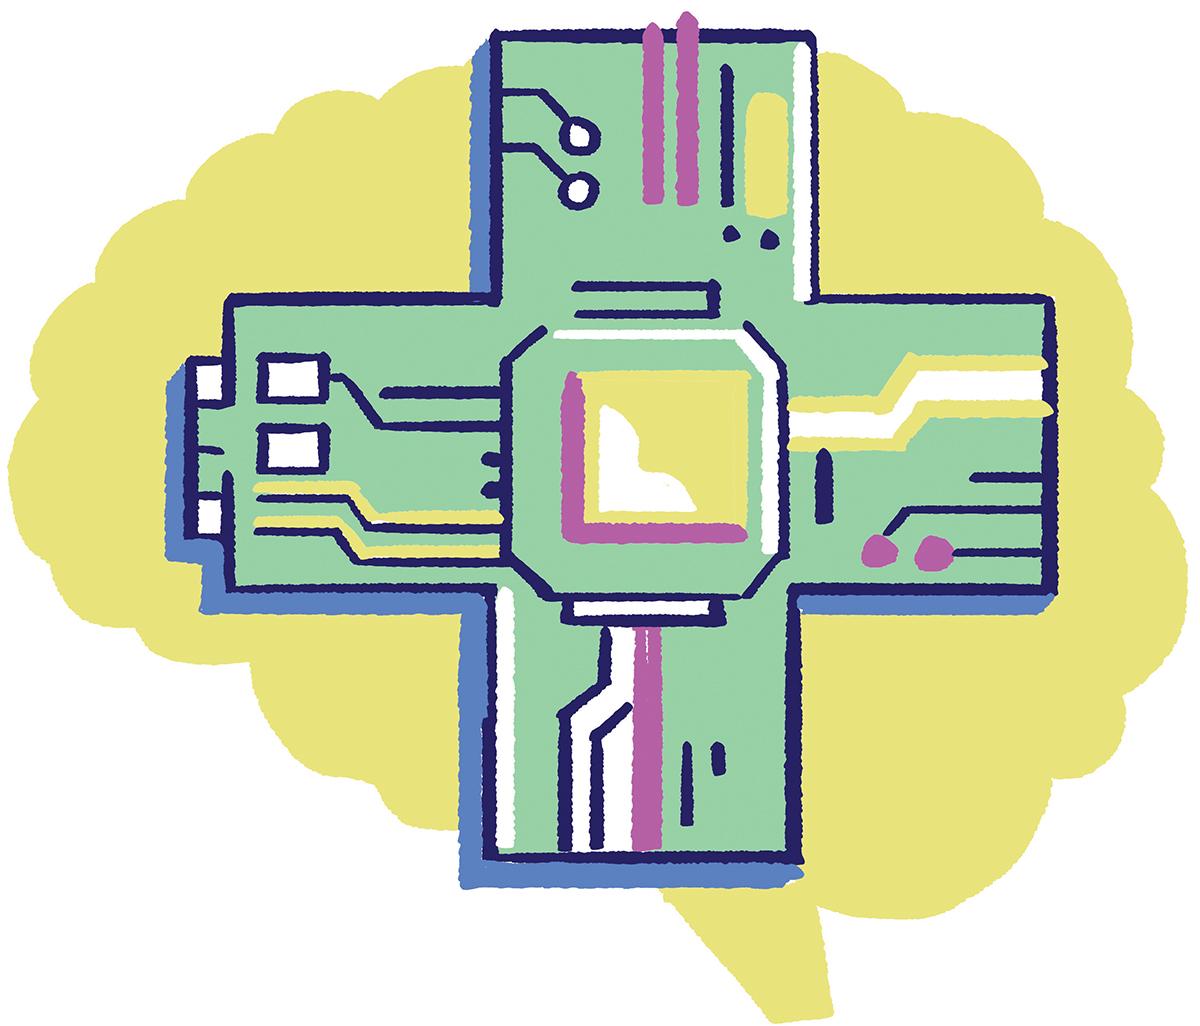 an illustration of a circuitboard in the shape of a medical cross overlaying a brain shape, representing "AI in Health." By Charlie Layton